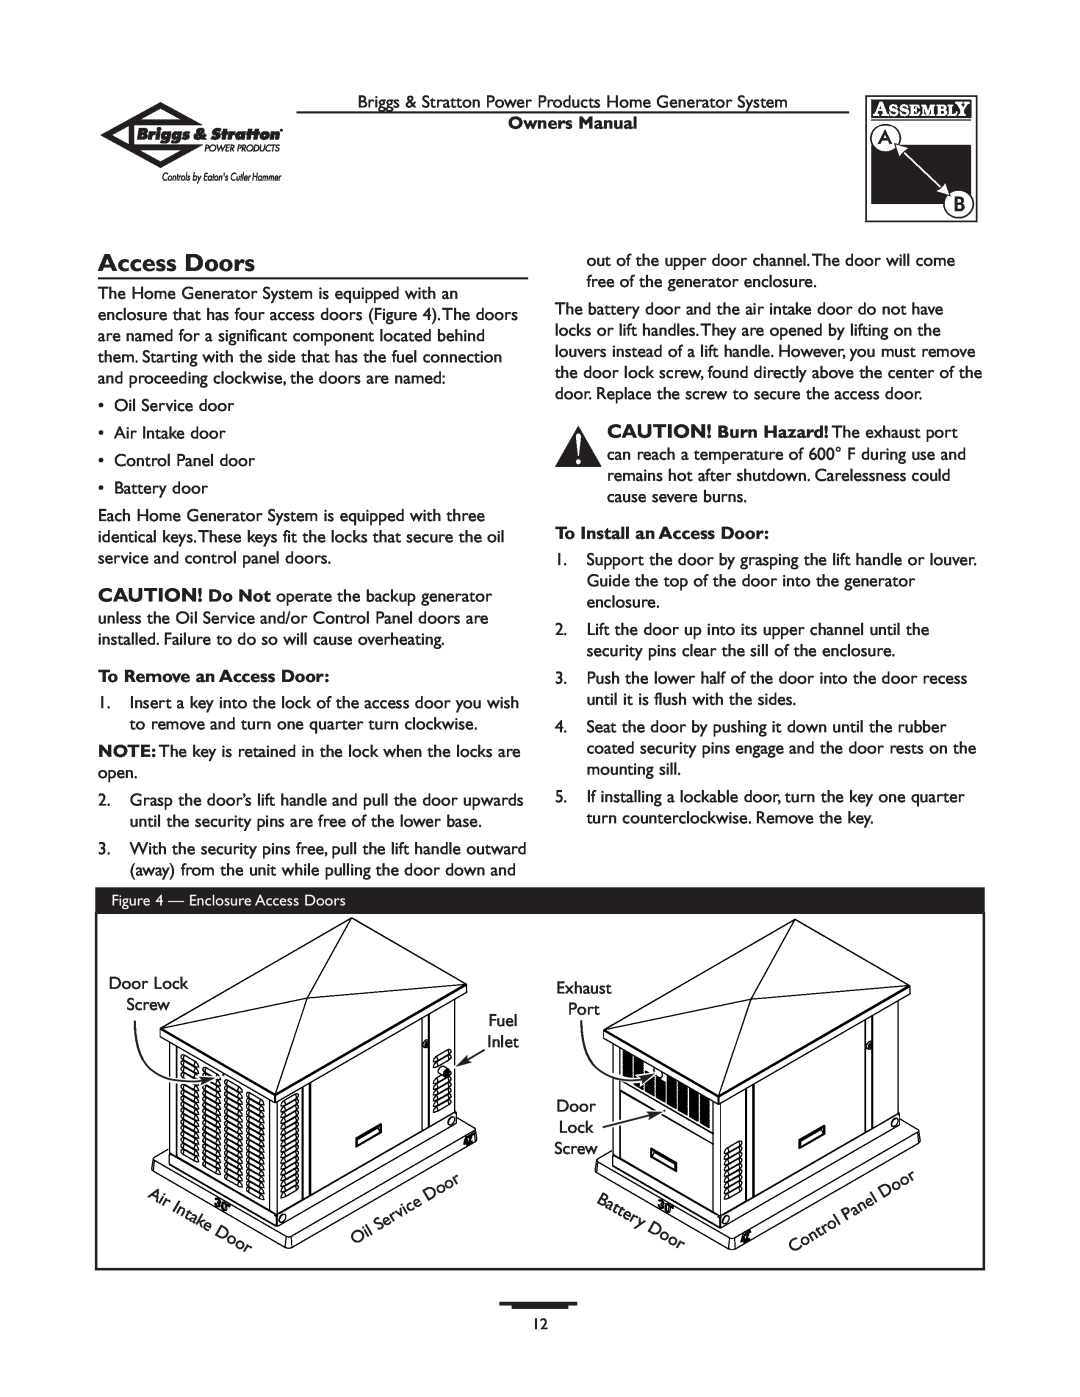 Briggs & Stratton 190839GS owner manual Access Doors, Owners Manual, To Remove an Access Door, To Install an Access Door 